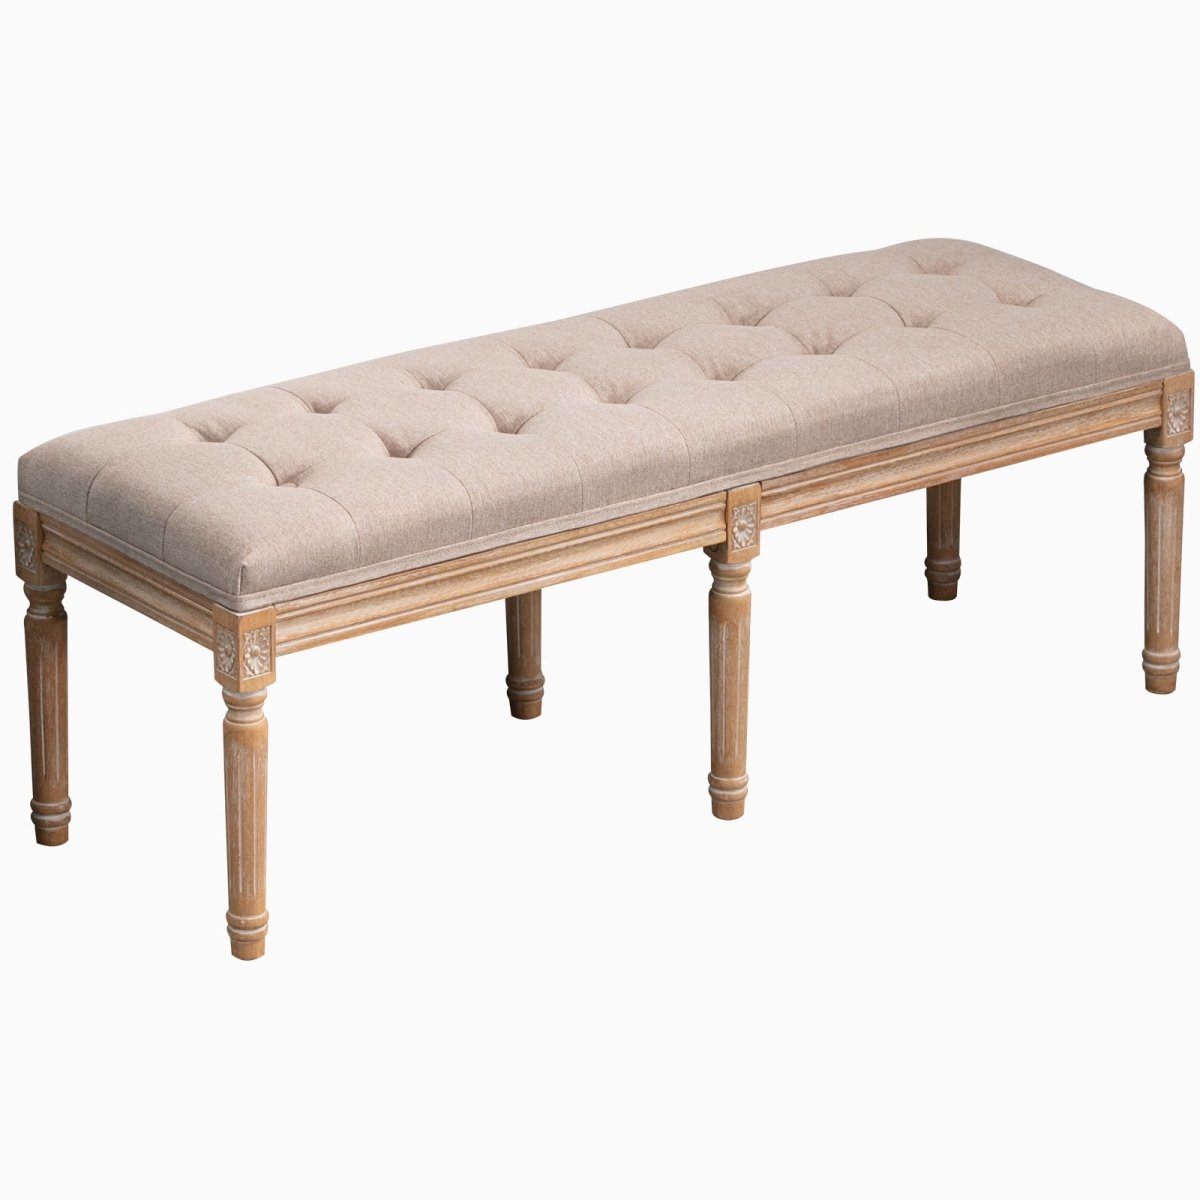 Benches | Vintage Upholstered End of Bed Bench Tufted Linen Entryway Bench with Padded Seat Cushion - Mjkoneottoman